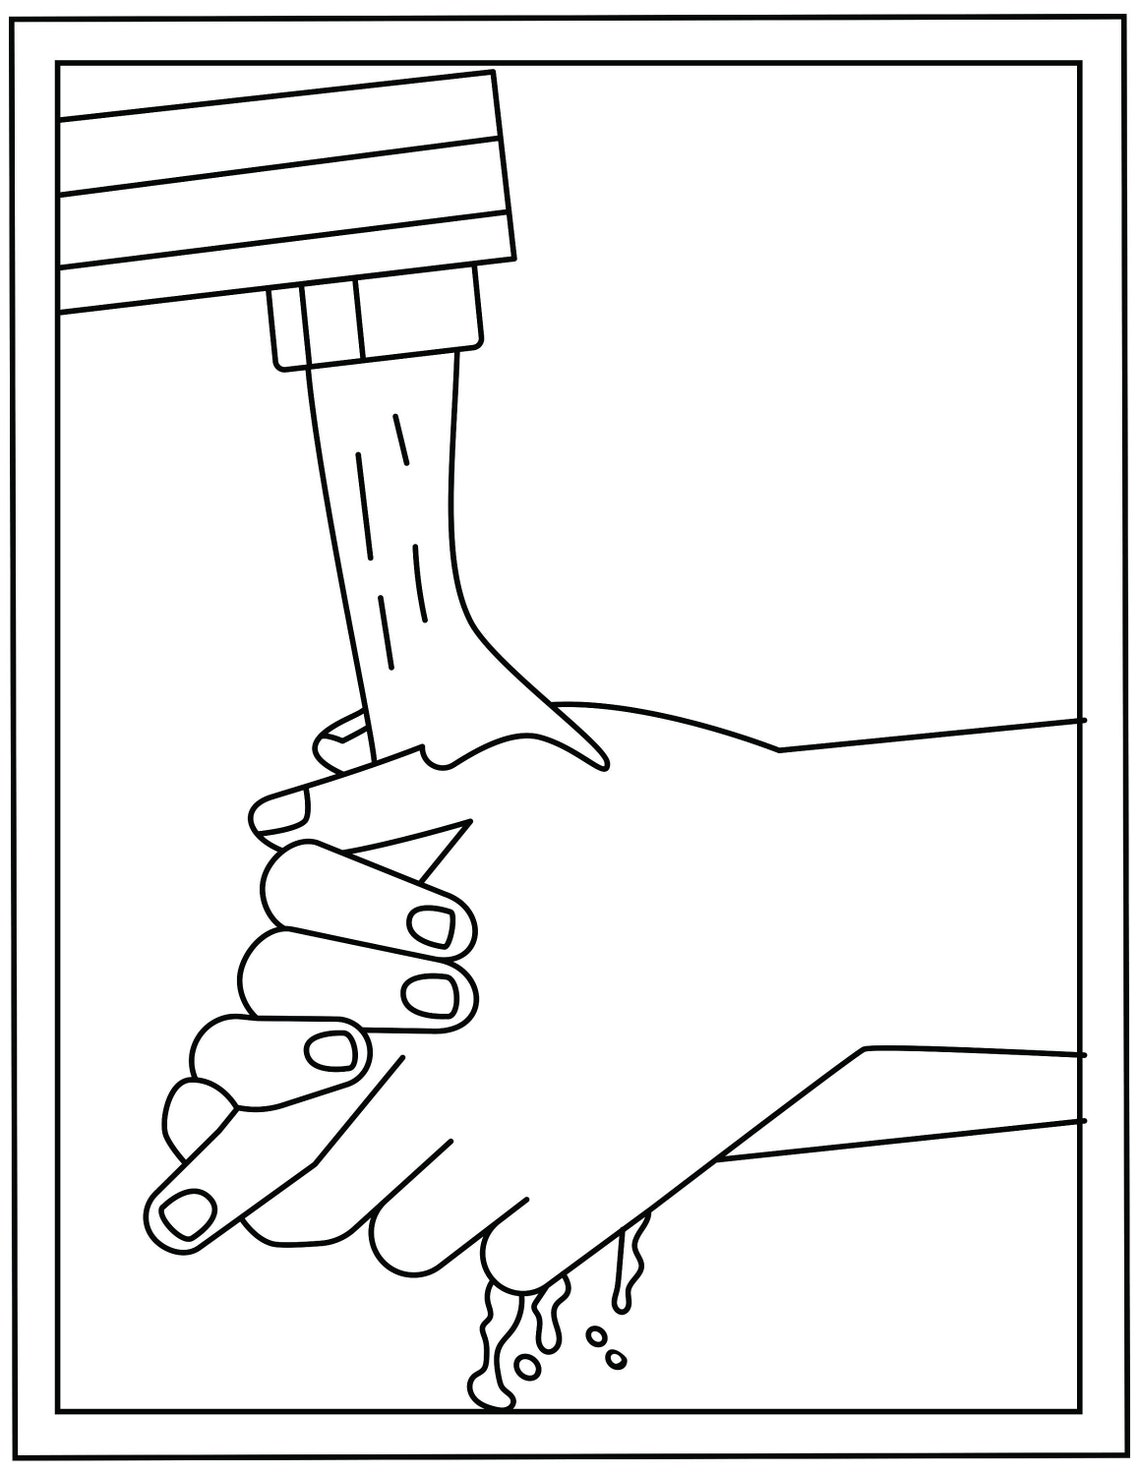 16 x Hands Hygiene Colouring Pages 8.5inch x 11inch premium | Etsy